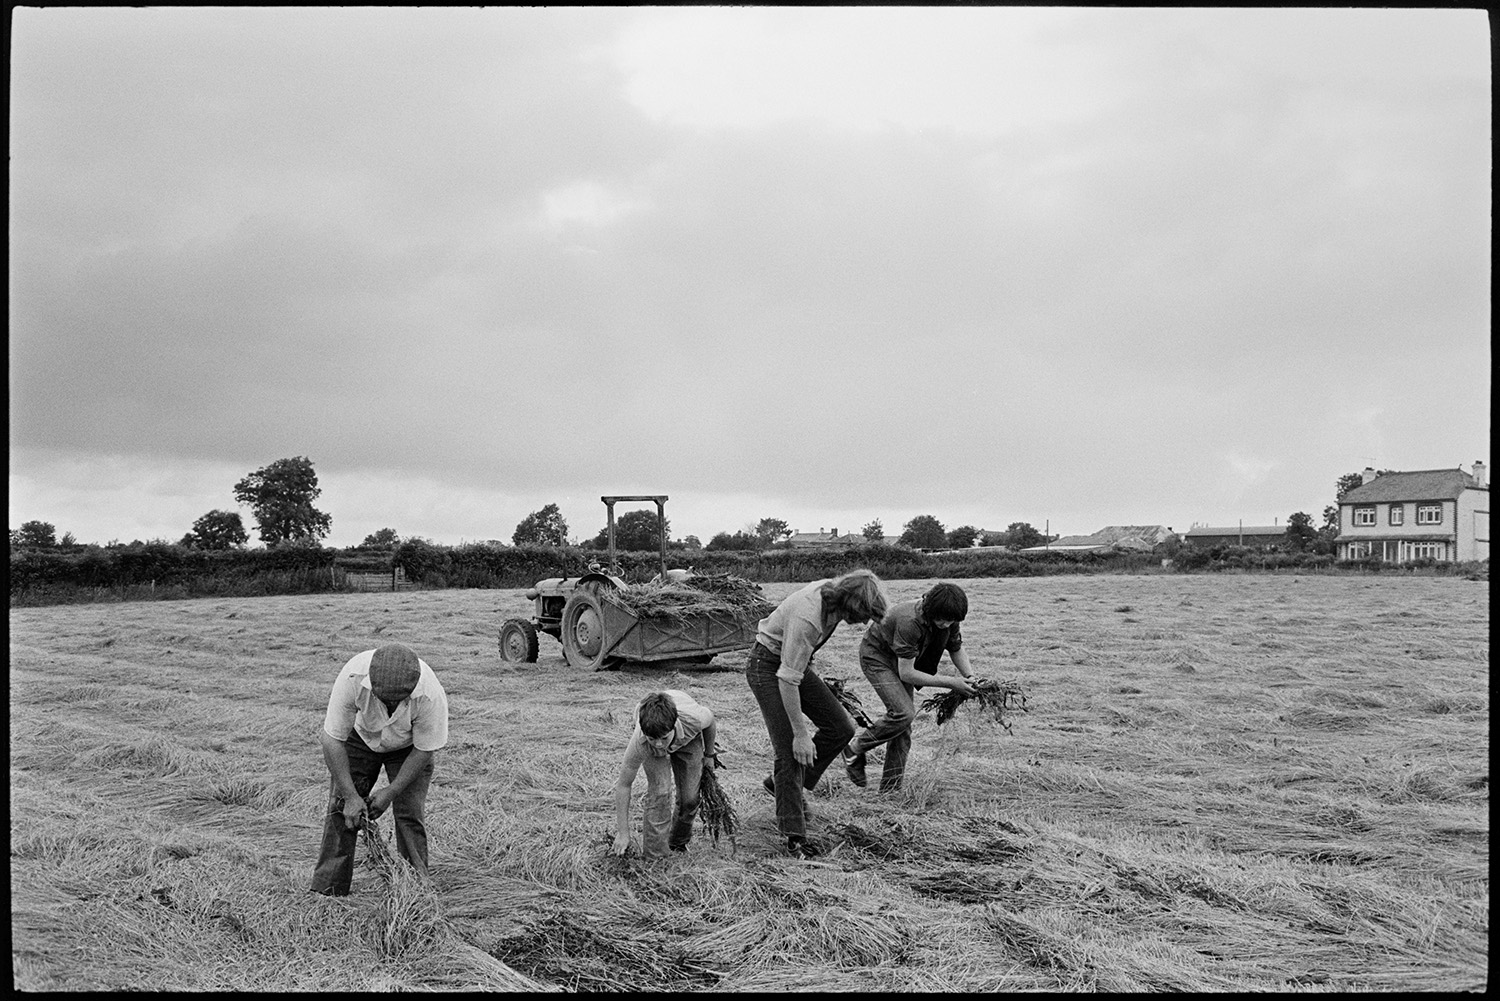 Men removing thistles from cut hay.
[Four people picking thistles out of cut hay lying on the ground in a field at Ashreigney. They are putting the thistles in a tractor and link box parked in the field. In the background a farmhouse and barns can be seen.]